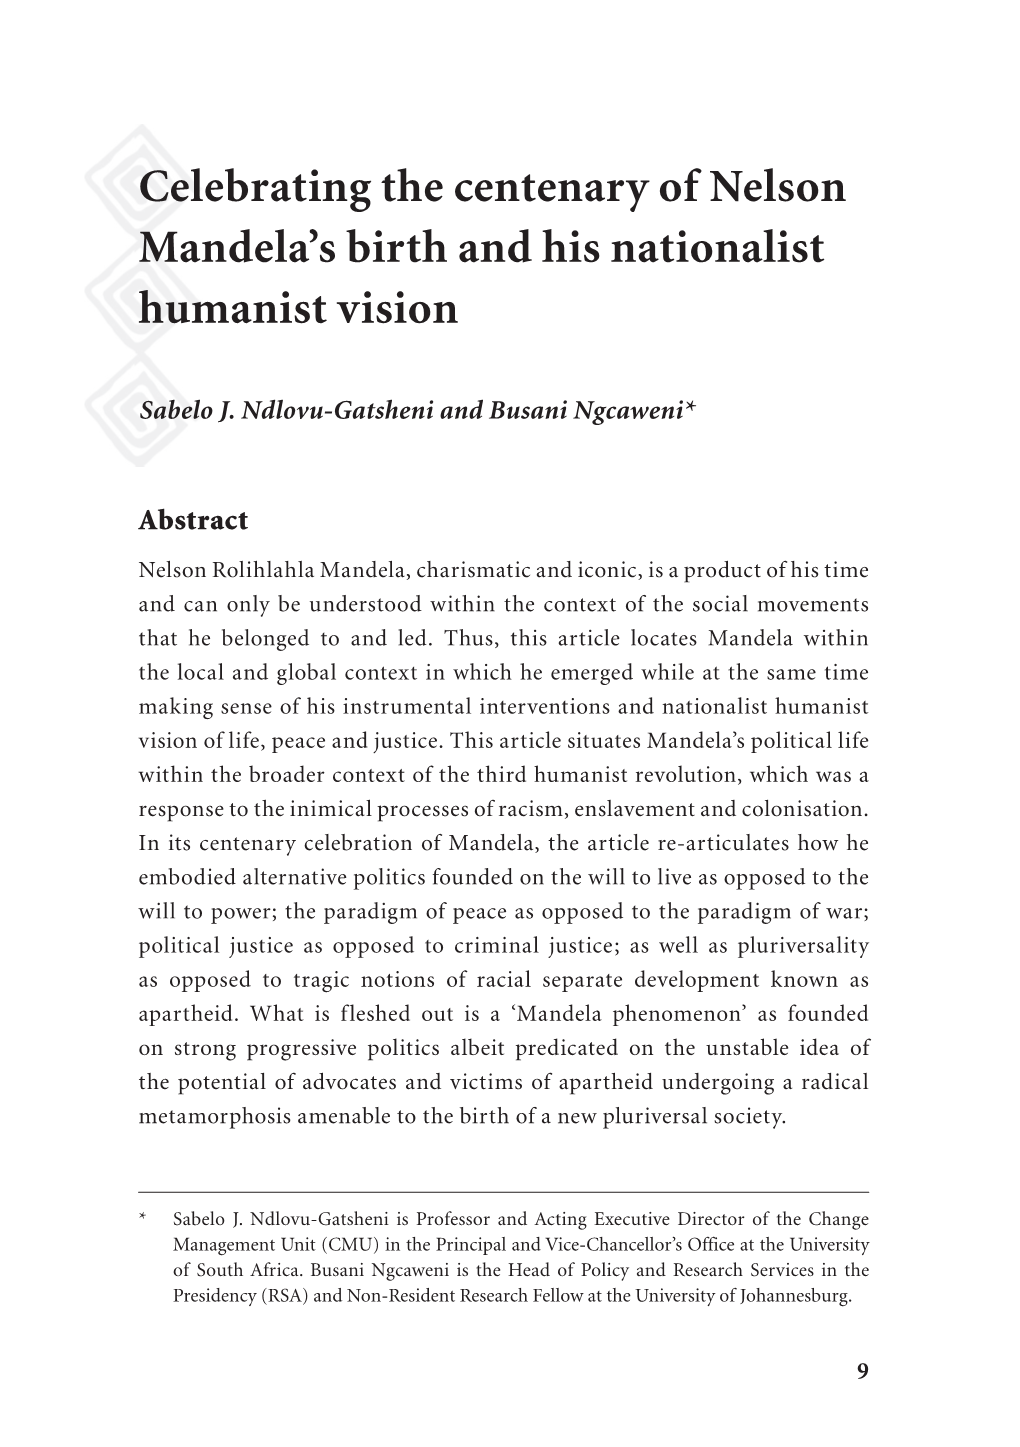 Celebrating the Centenary of Nelson Mandela's Birth and His Nationalist